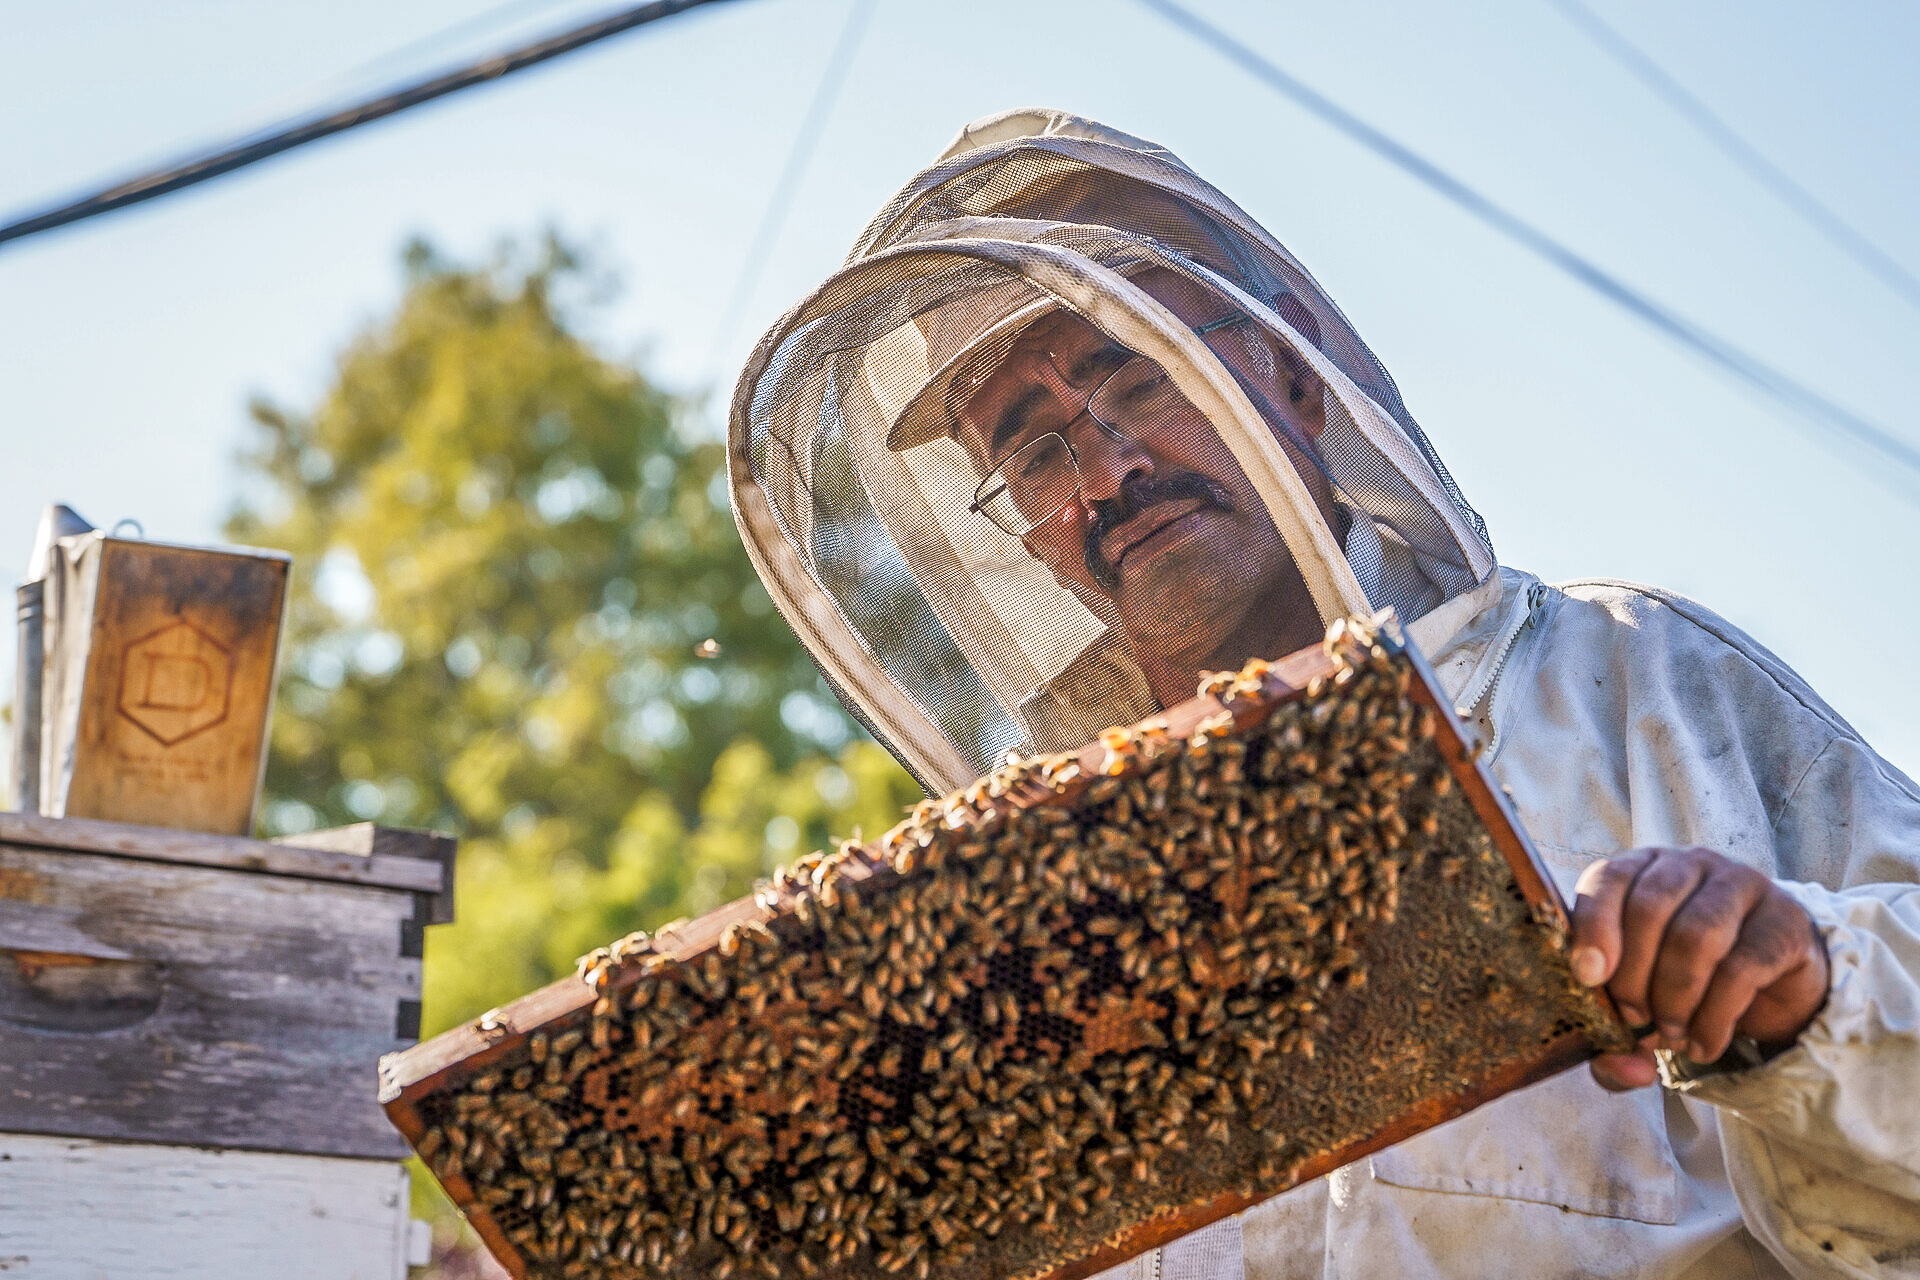 A man with medium toned skin and a thick black mustache wearing a beekeeper's outfit with a protective mesh helmet stands holding a large comb of honey, gazing at it, with a sunny sky behind him